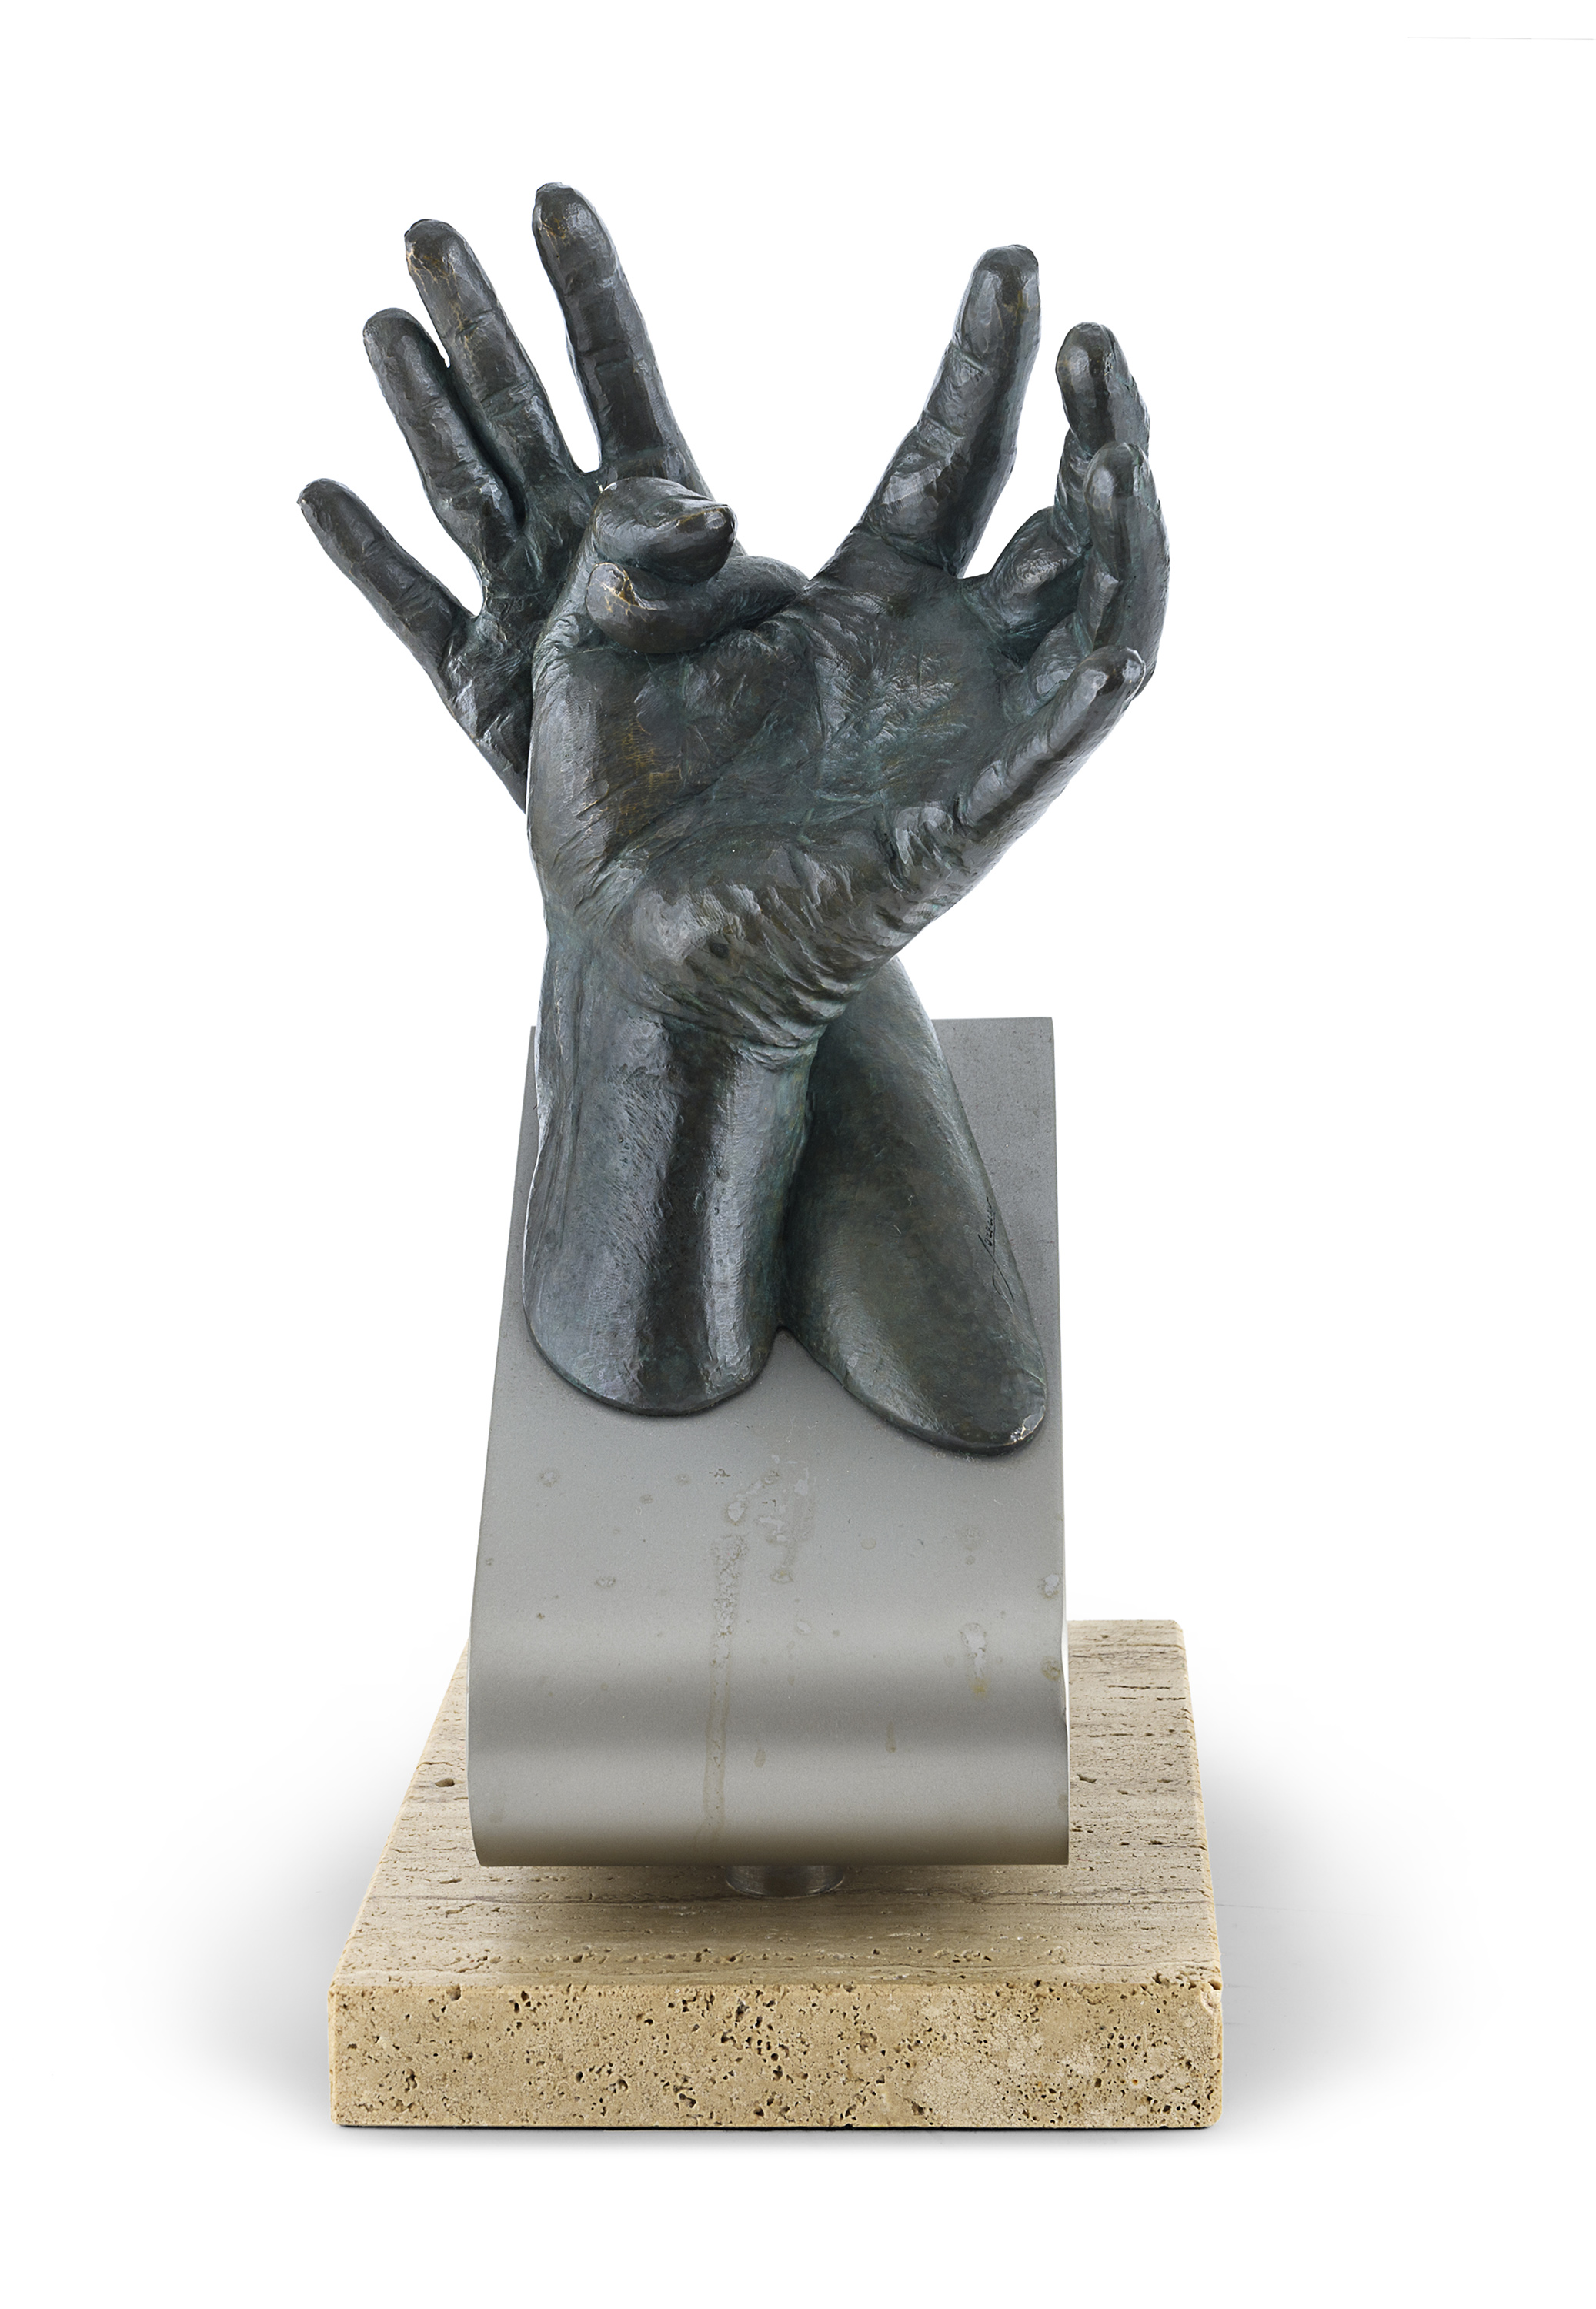 BRONZE-PLATED RESIN SCULPTURE 'WITH YOU' BY LORENZO QUINN - Image 2 of 4